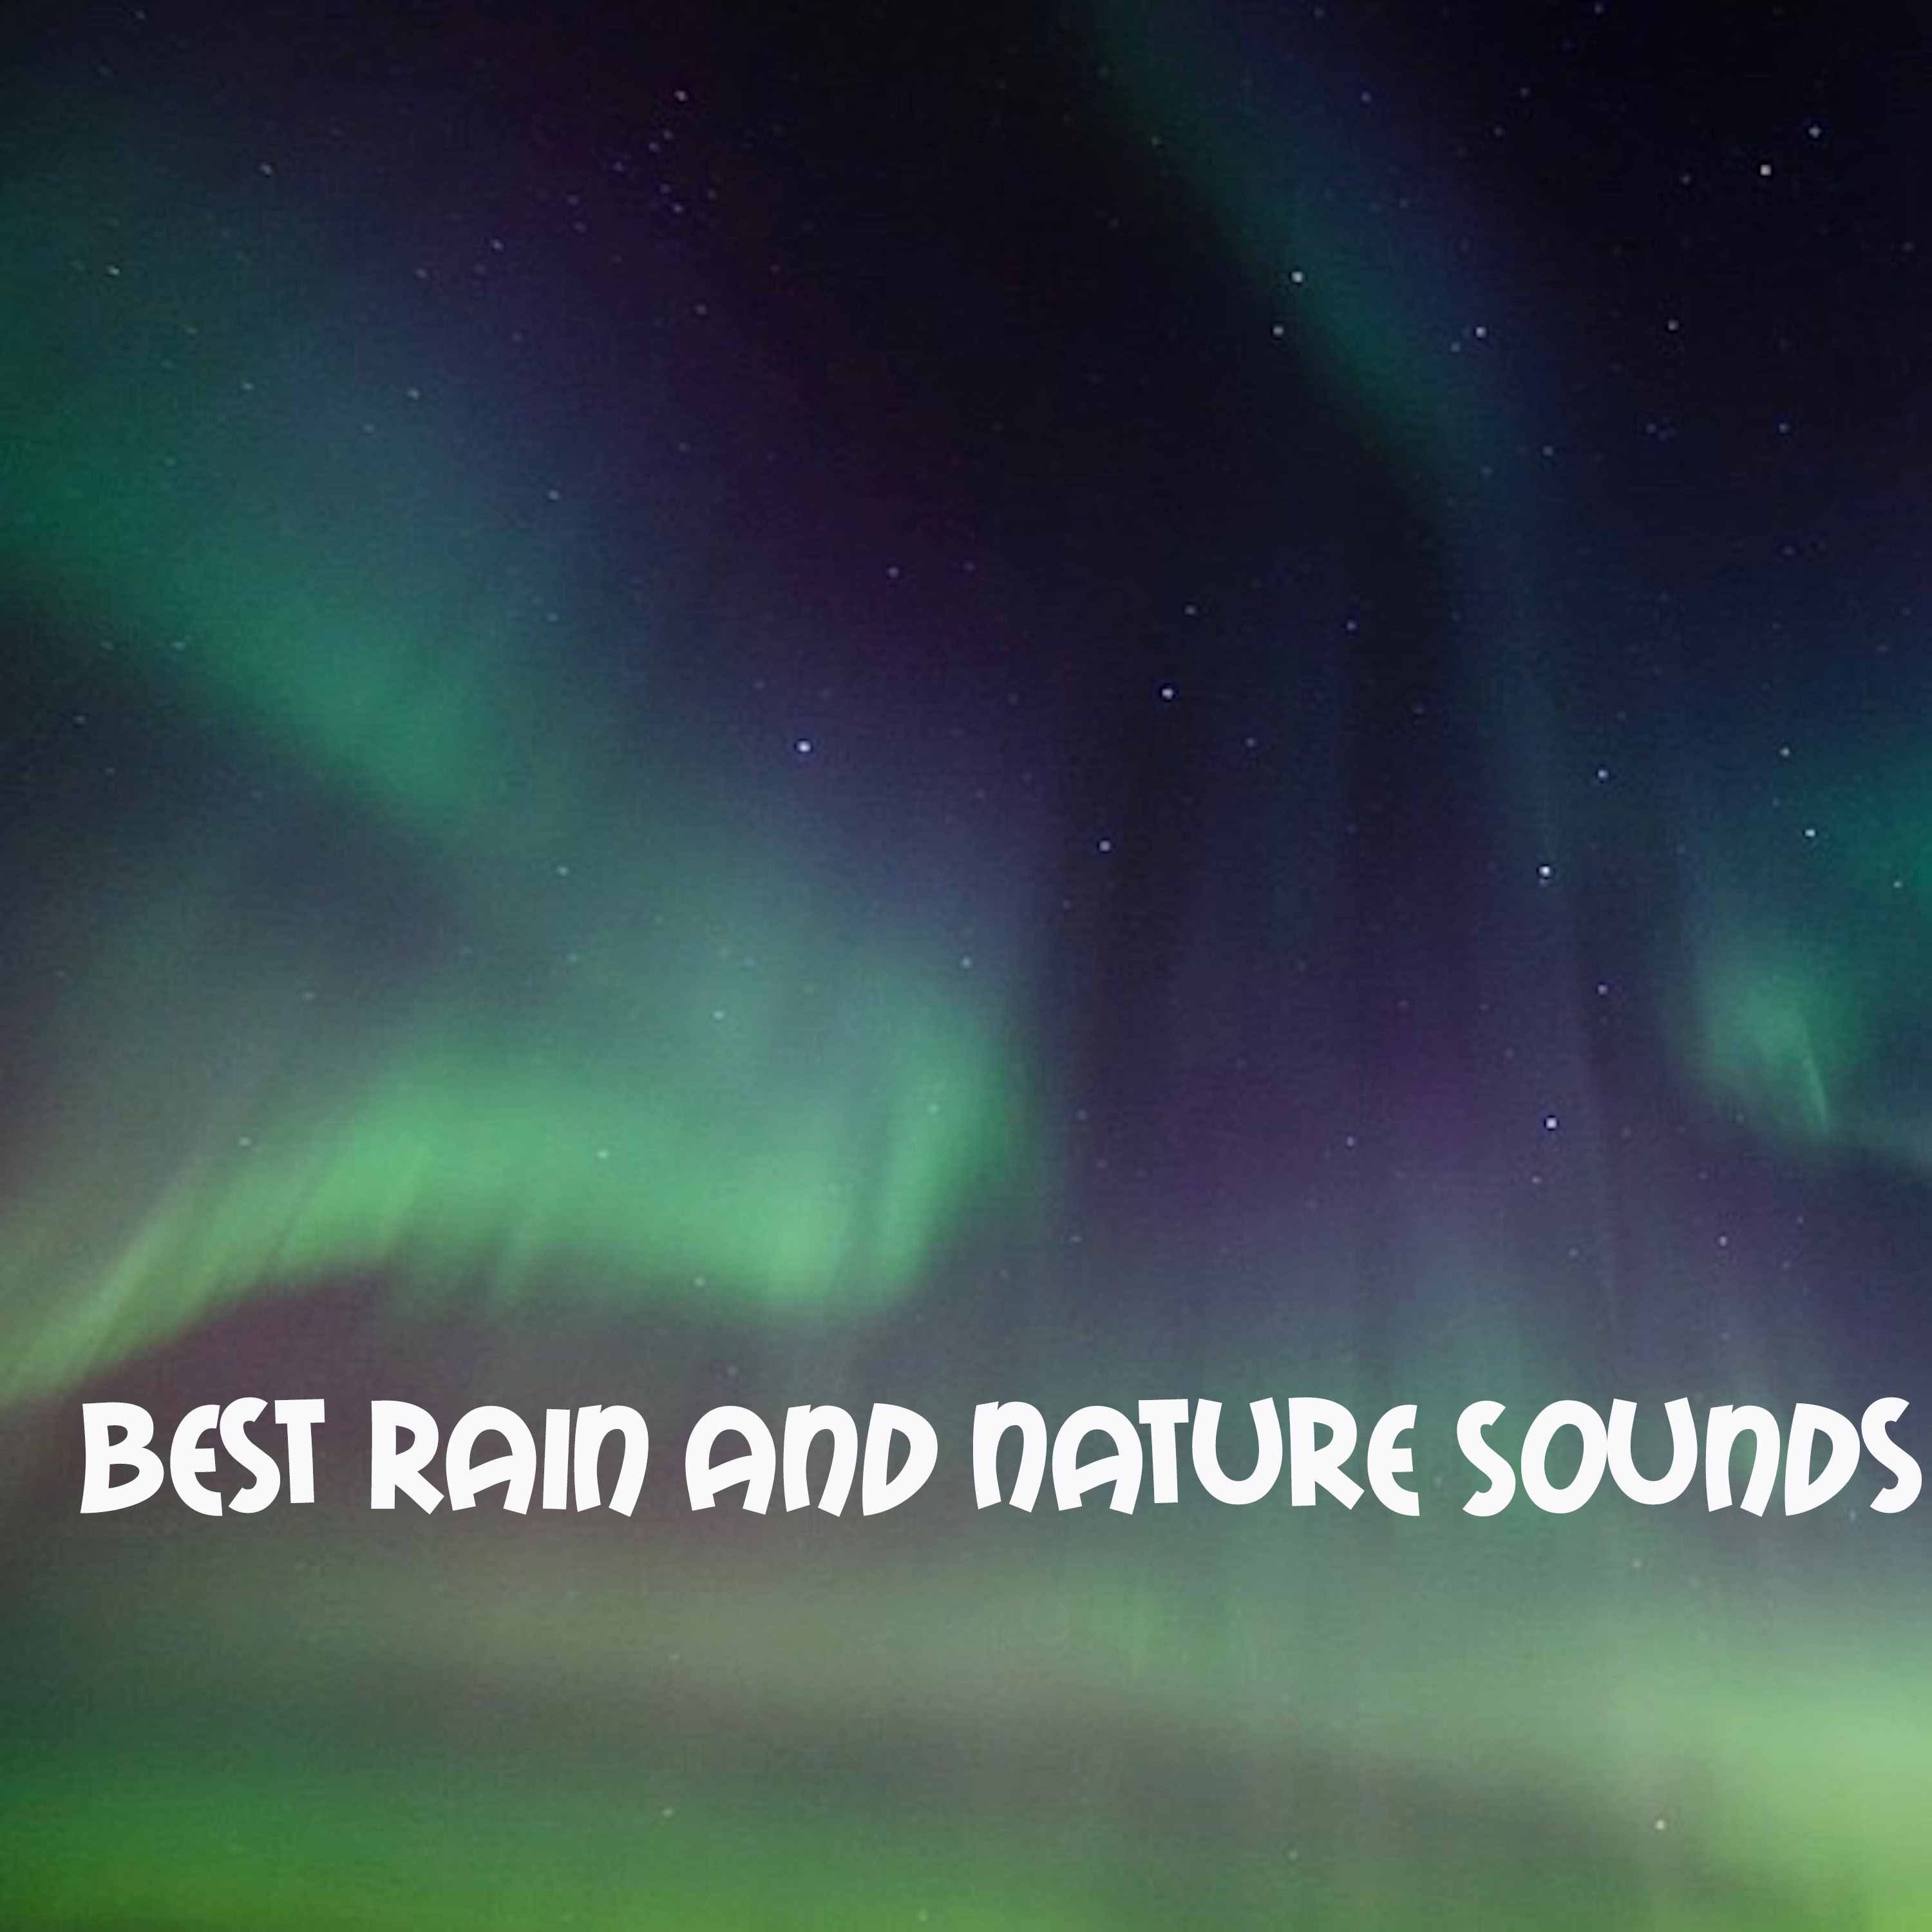 13 The Best Rain and Nature Sounds. Real Rain Sounds for Sleep and Meditation